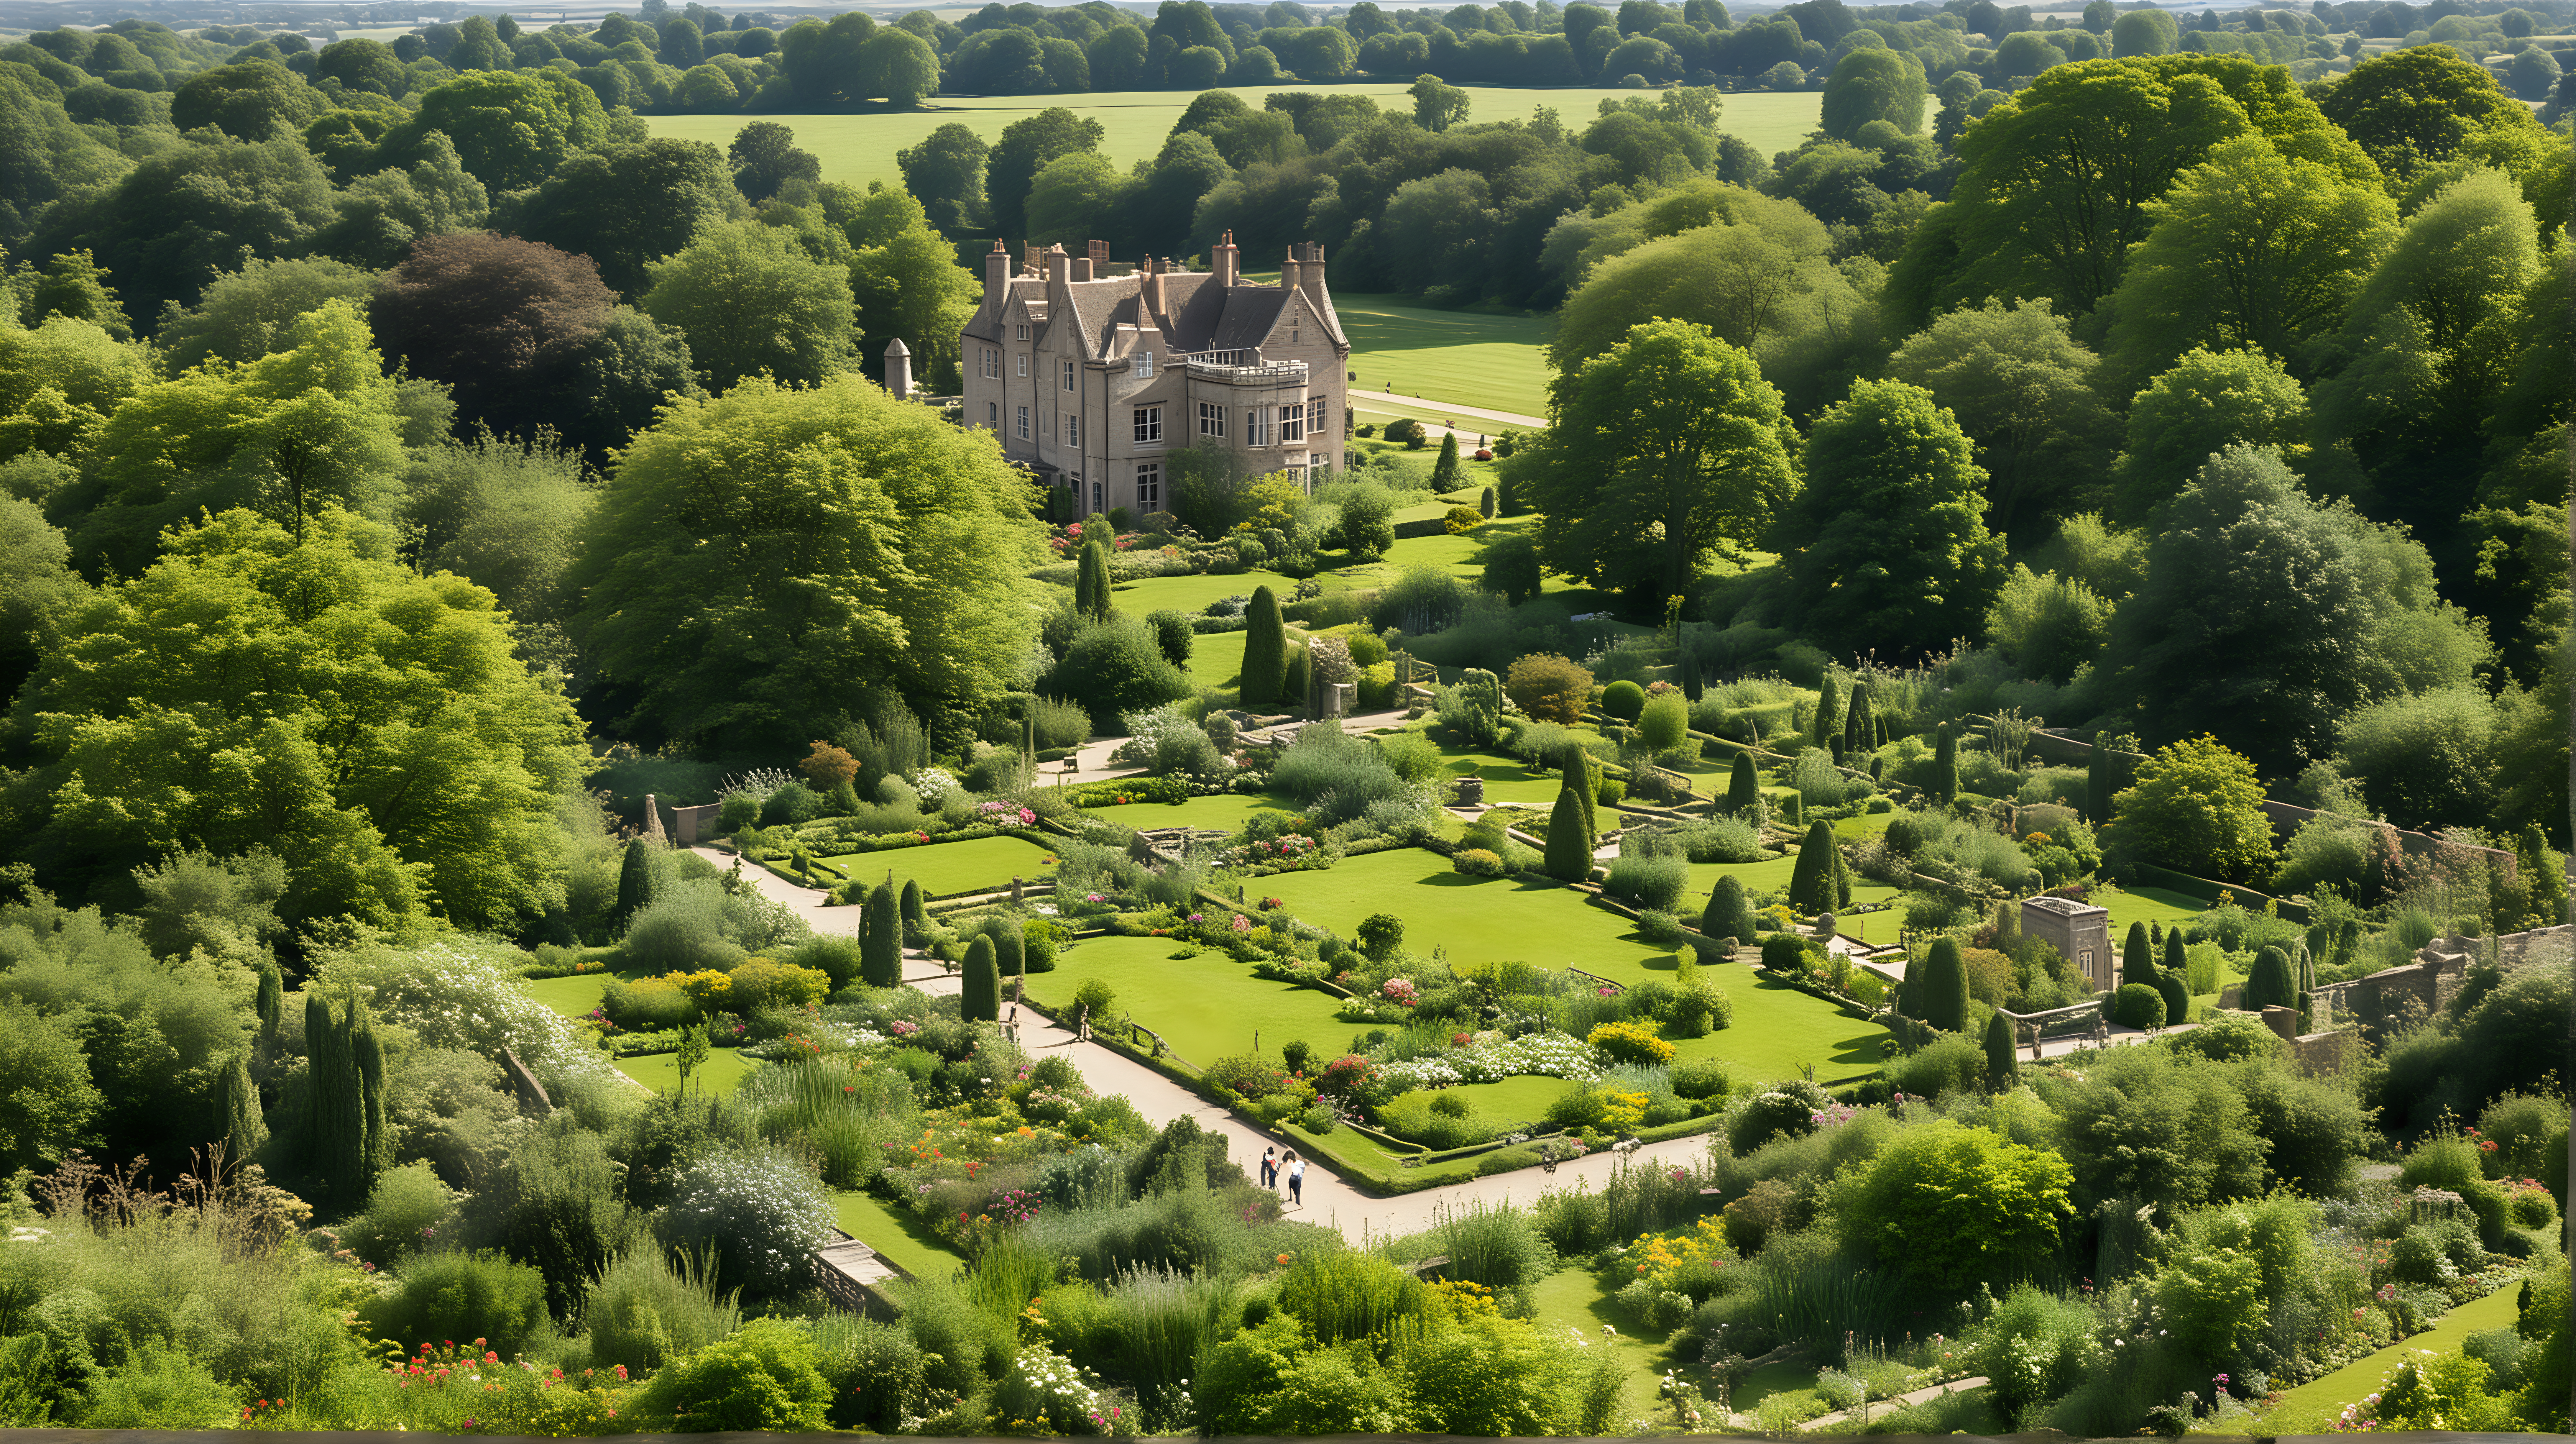 english gardens around an old manor house, distant view from a high building, sunny